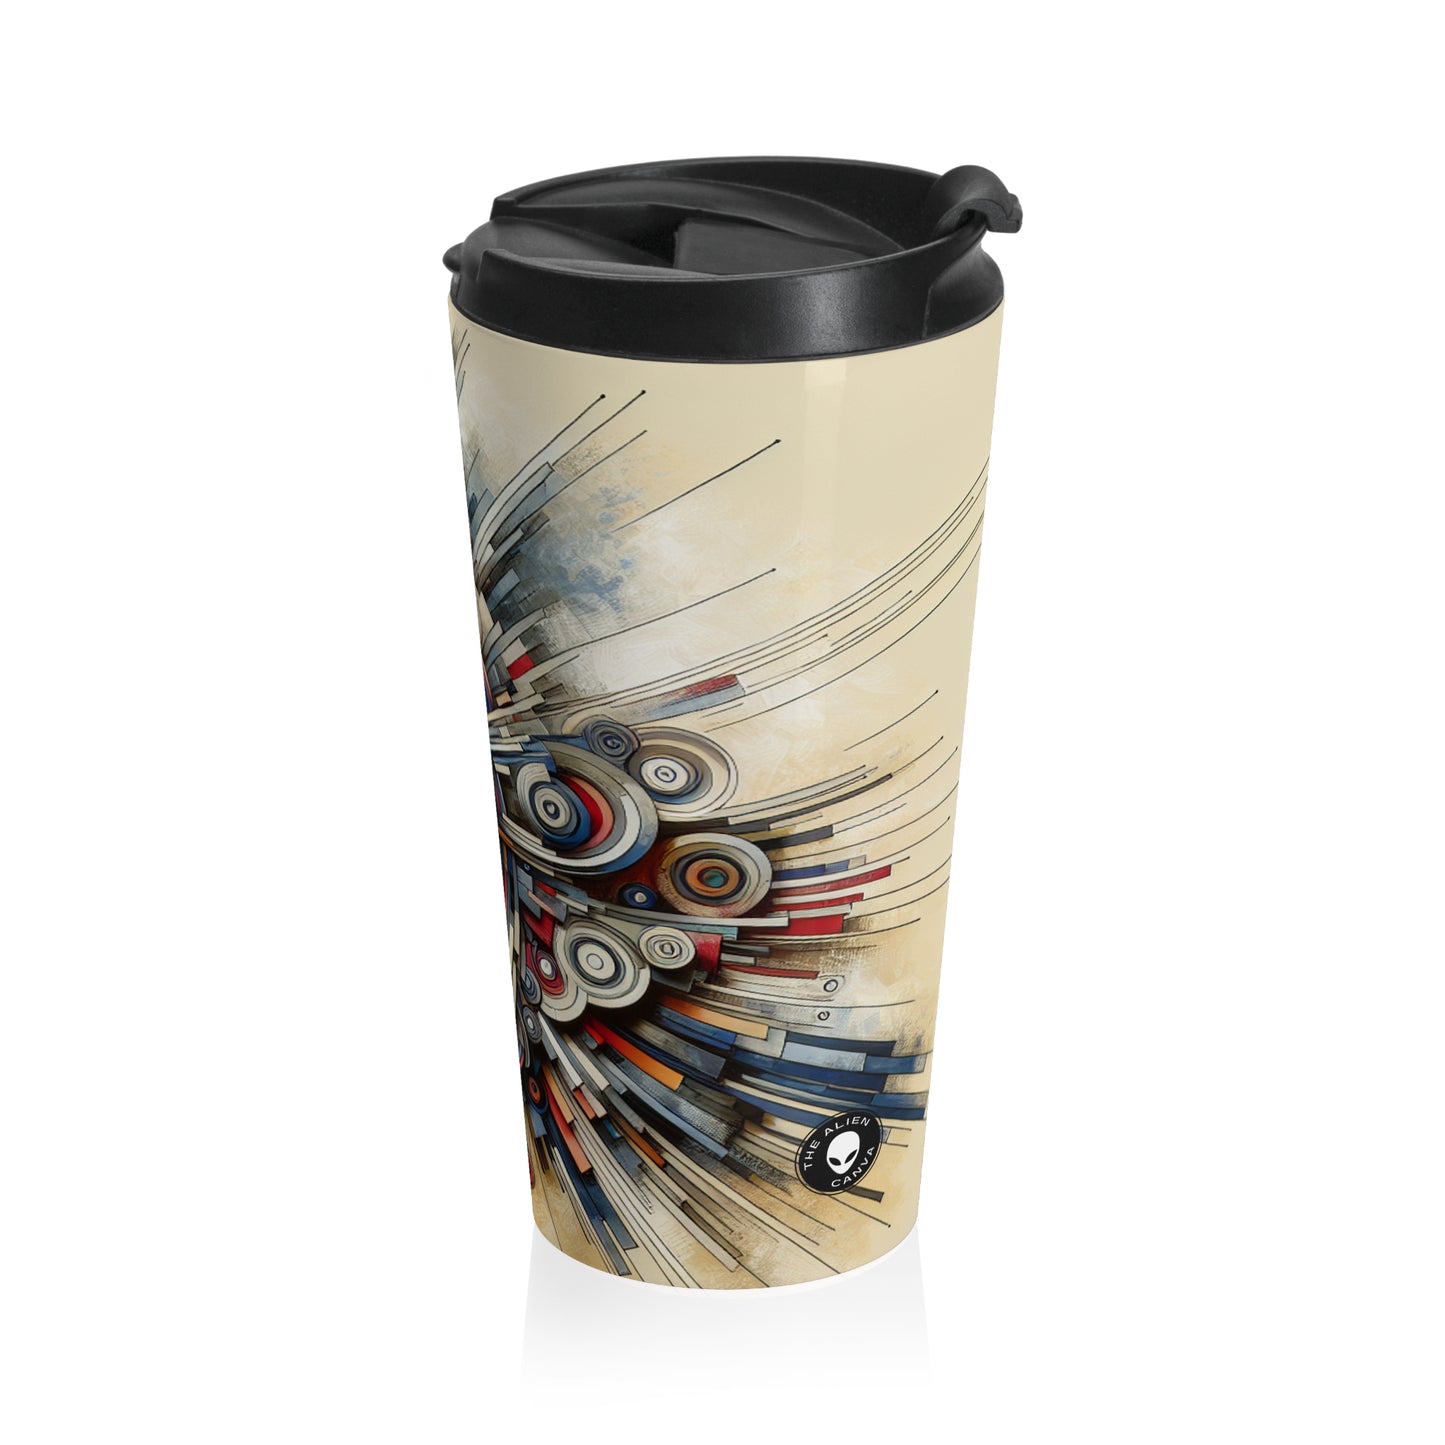 "Fragmented Realms: A Surreal Exploration in Color and Form" - The Alien Stainless Steel Travel Mug Avant-garde Art